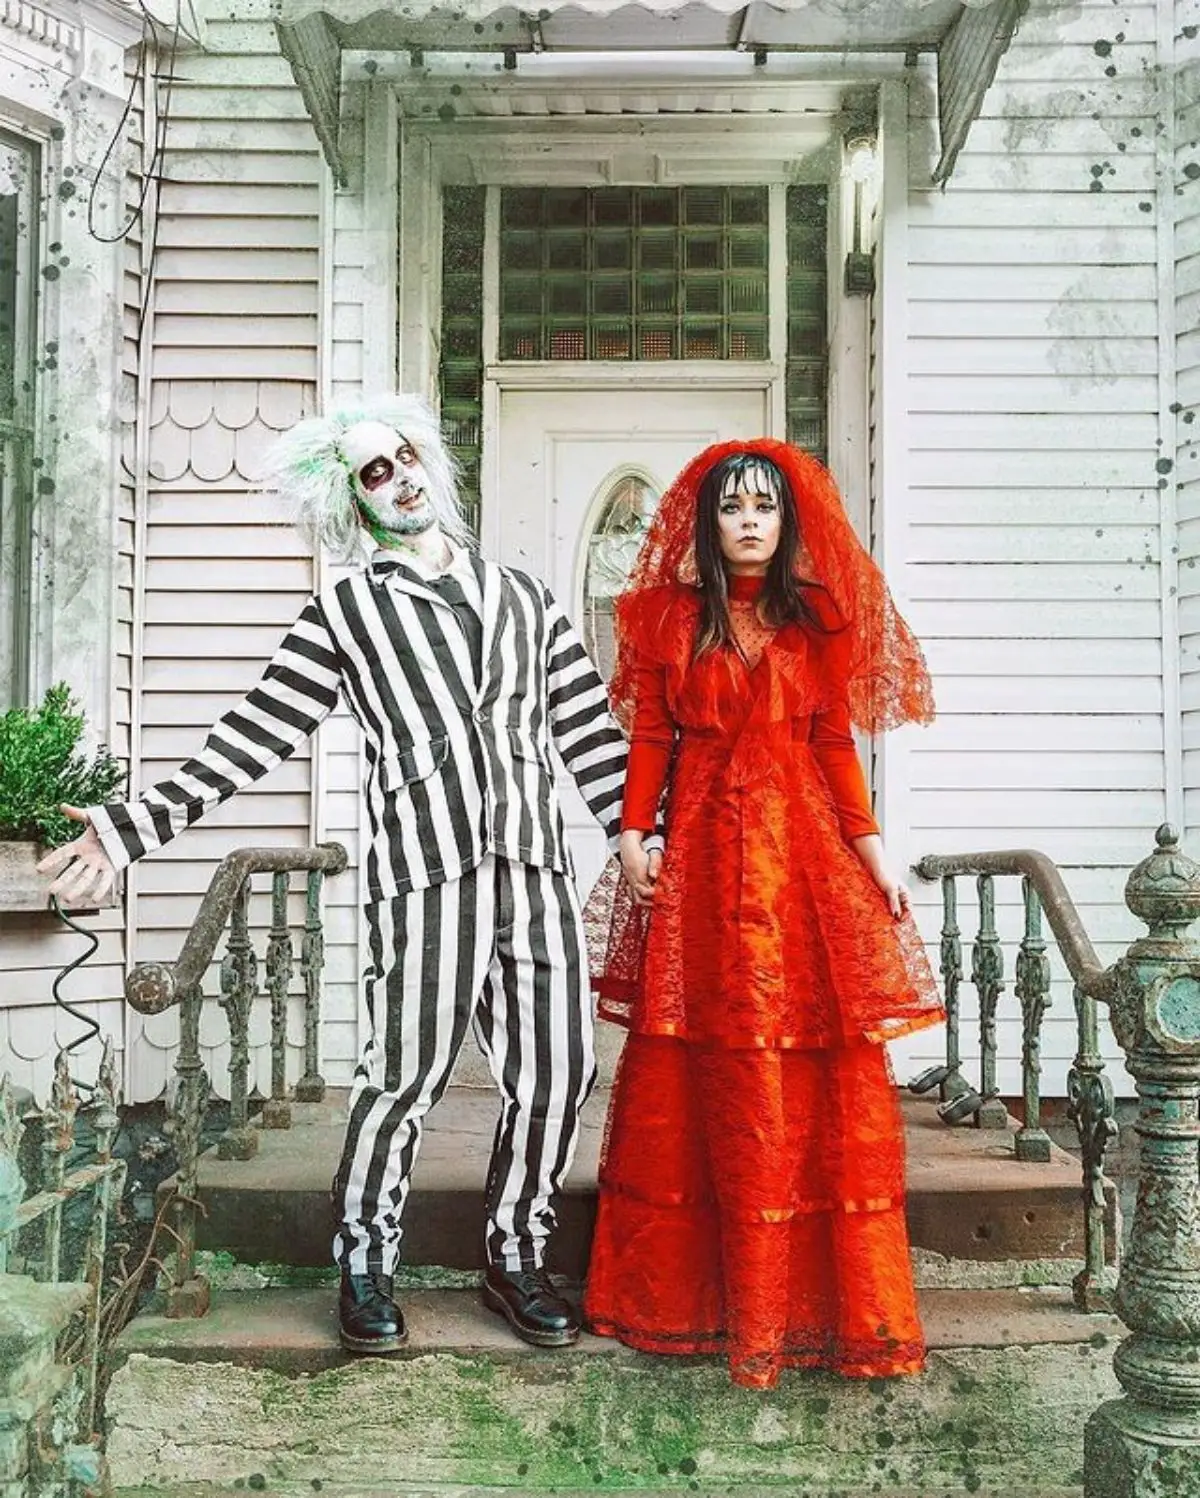 Dressing up as Beetlejuice and Lydia Deetz is one of the couples halloween costumes in this post.